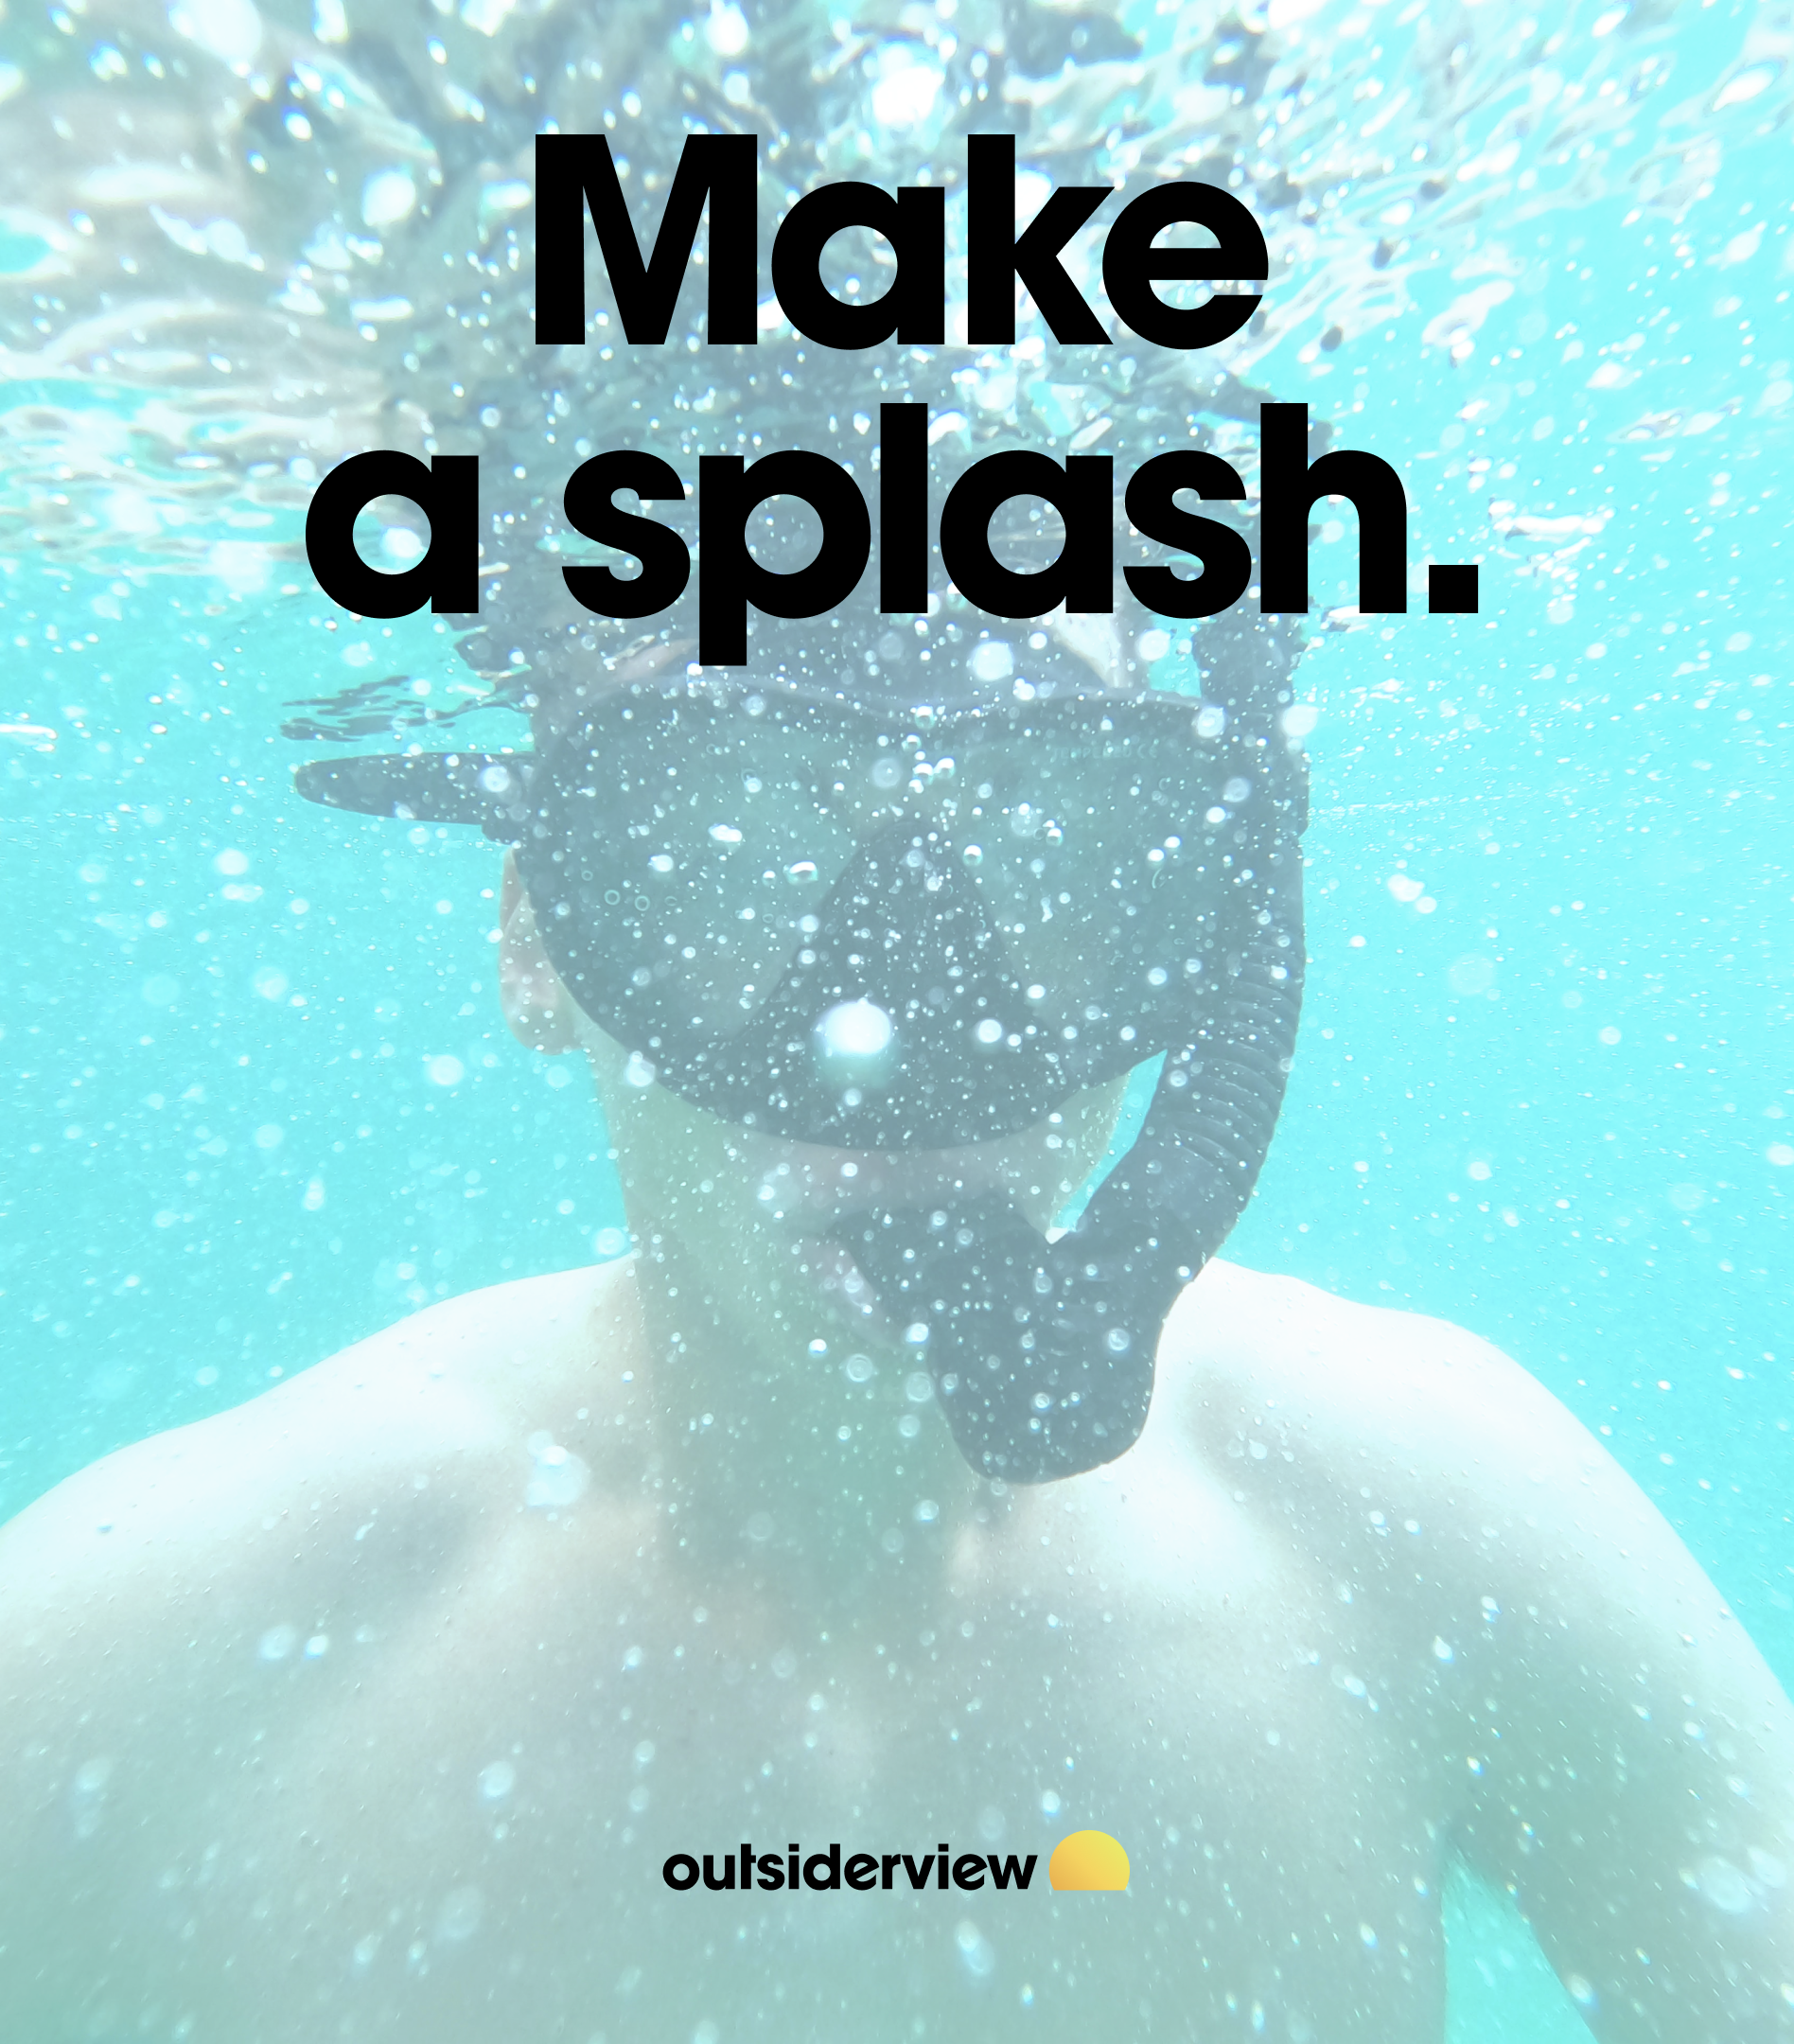 Lifestyle photo paired with the messaging device, “Make a splash.”